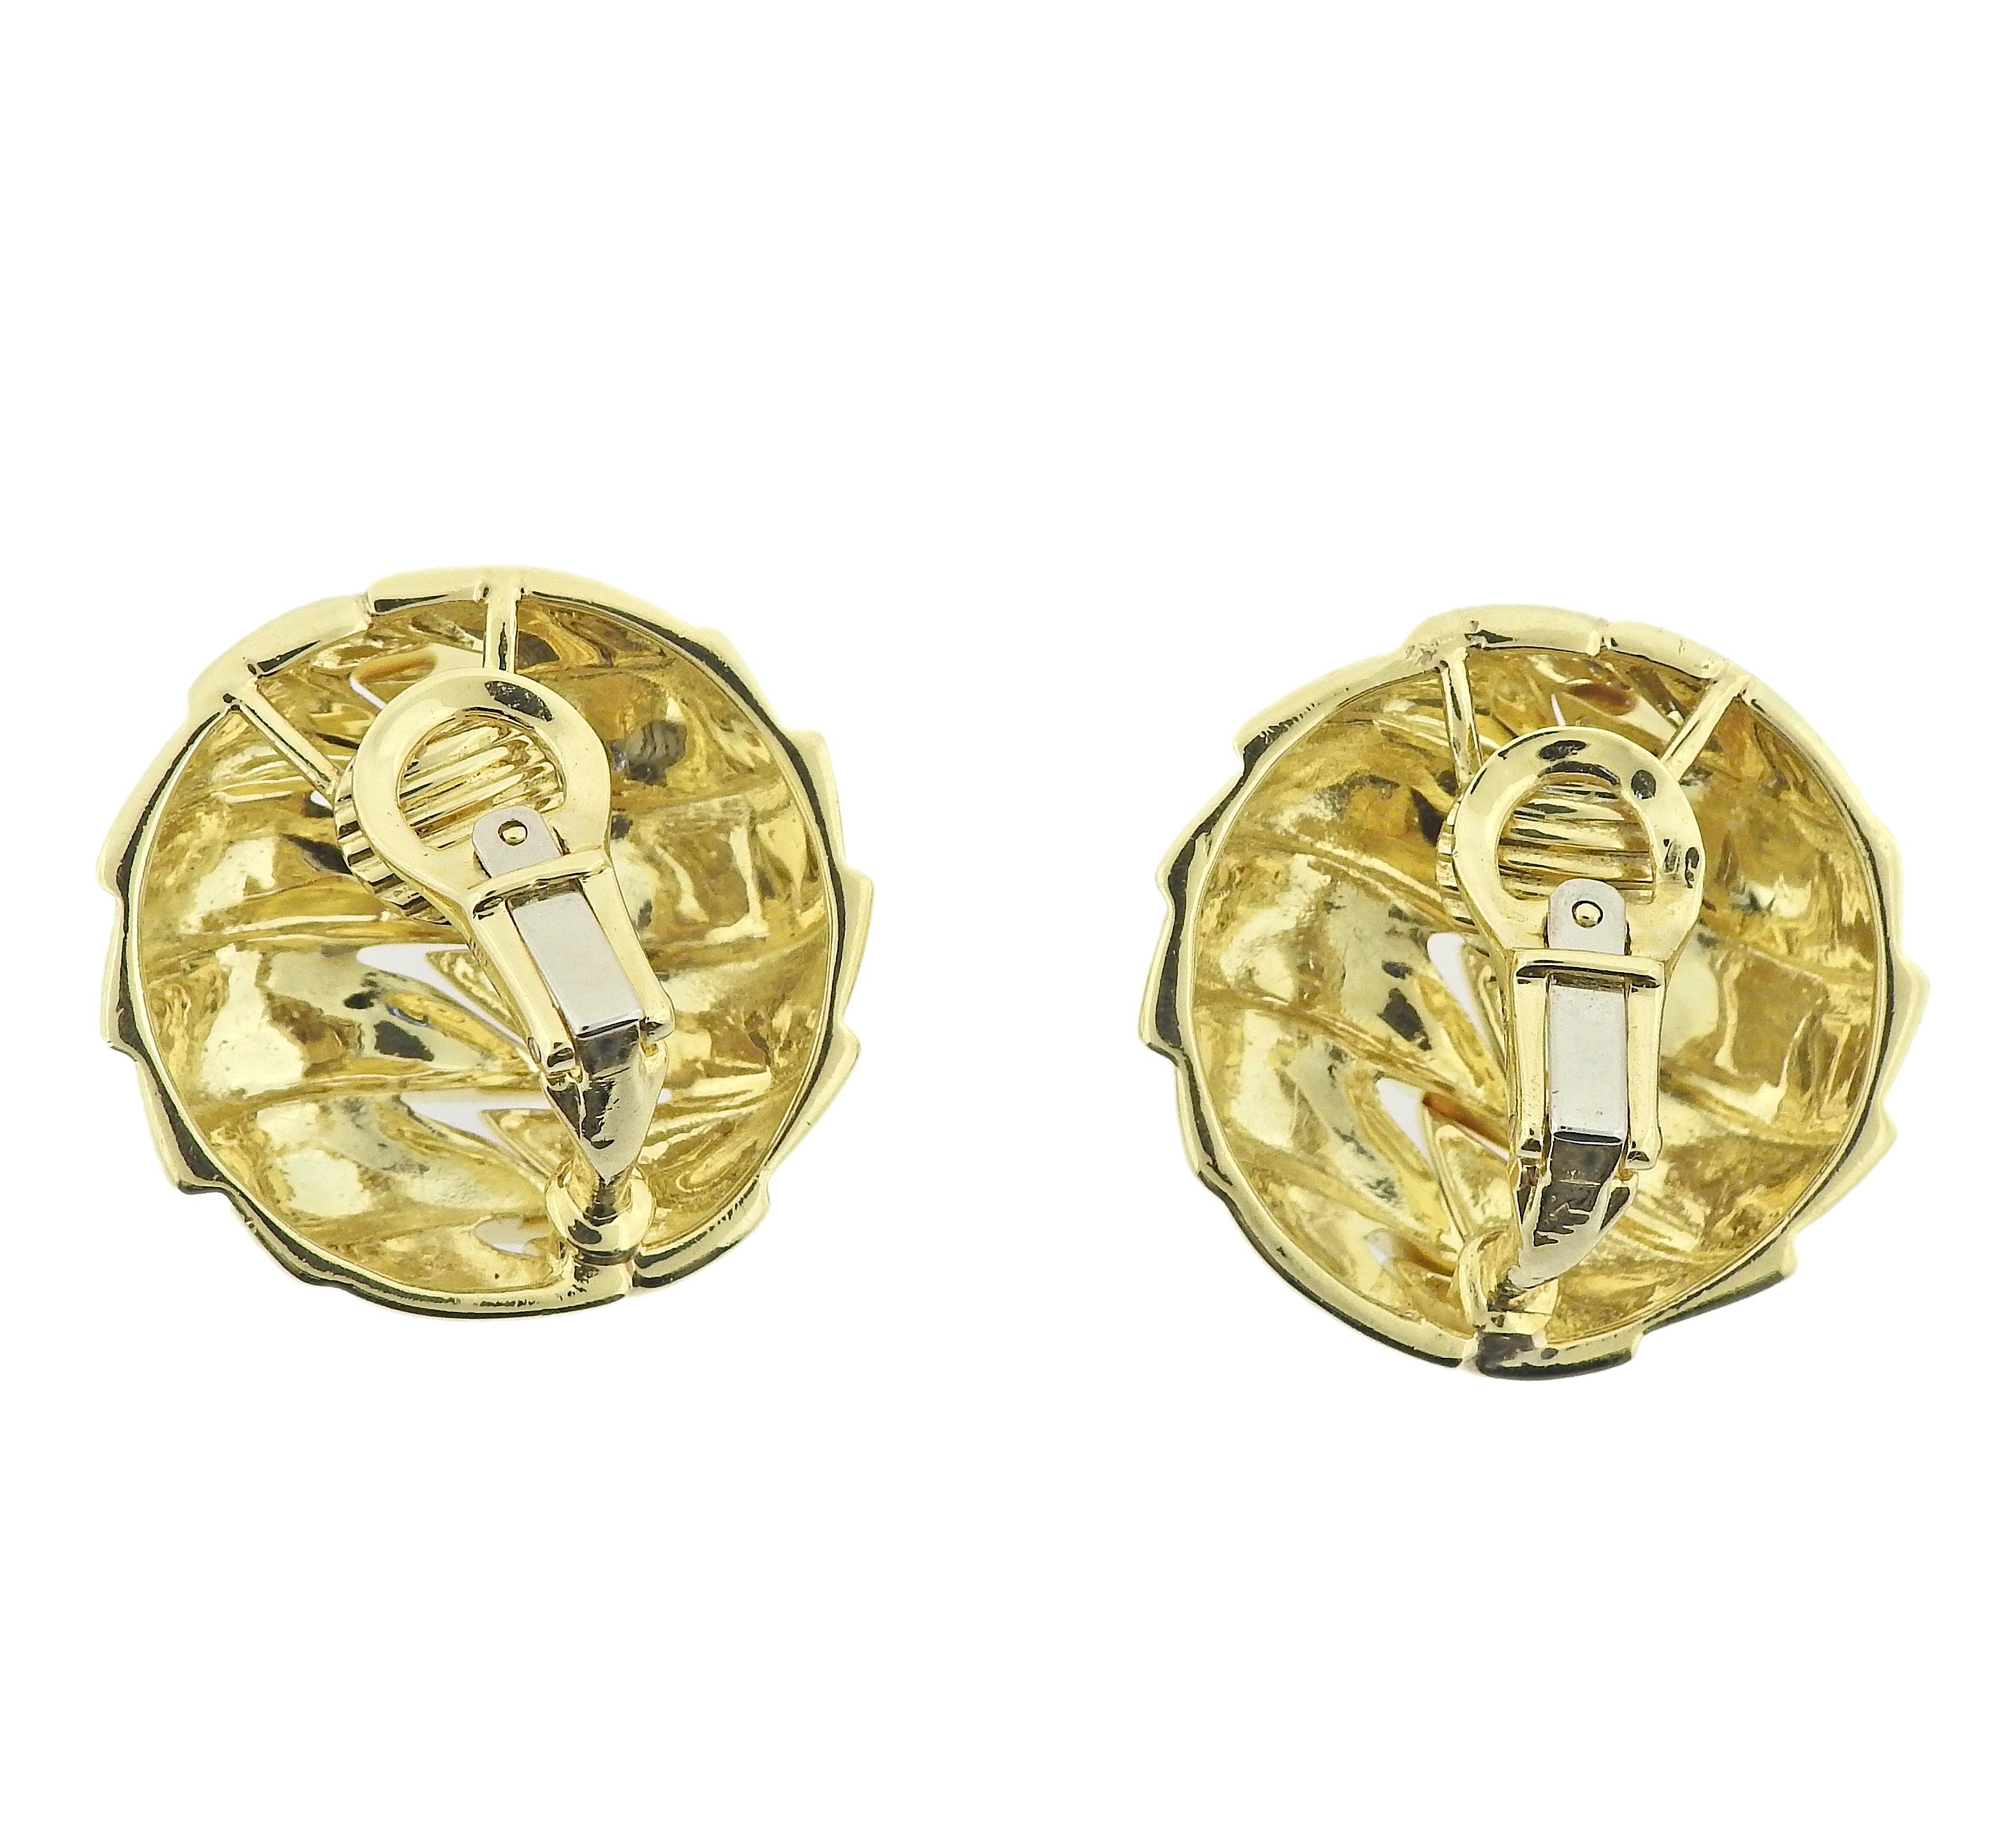 Pair of Tiffany & Co button earrings in 18k gold. Earrings are 26mm in diameter. Weight - 33.8 grams. Marked: 1998, 750, Tiffany & Co. 